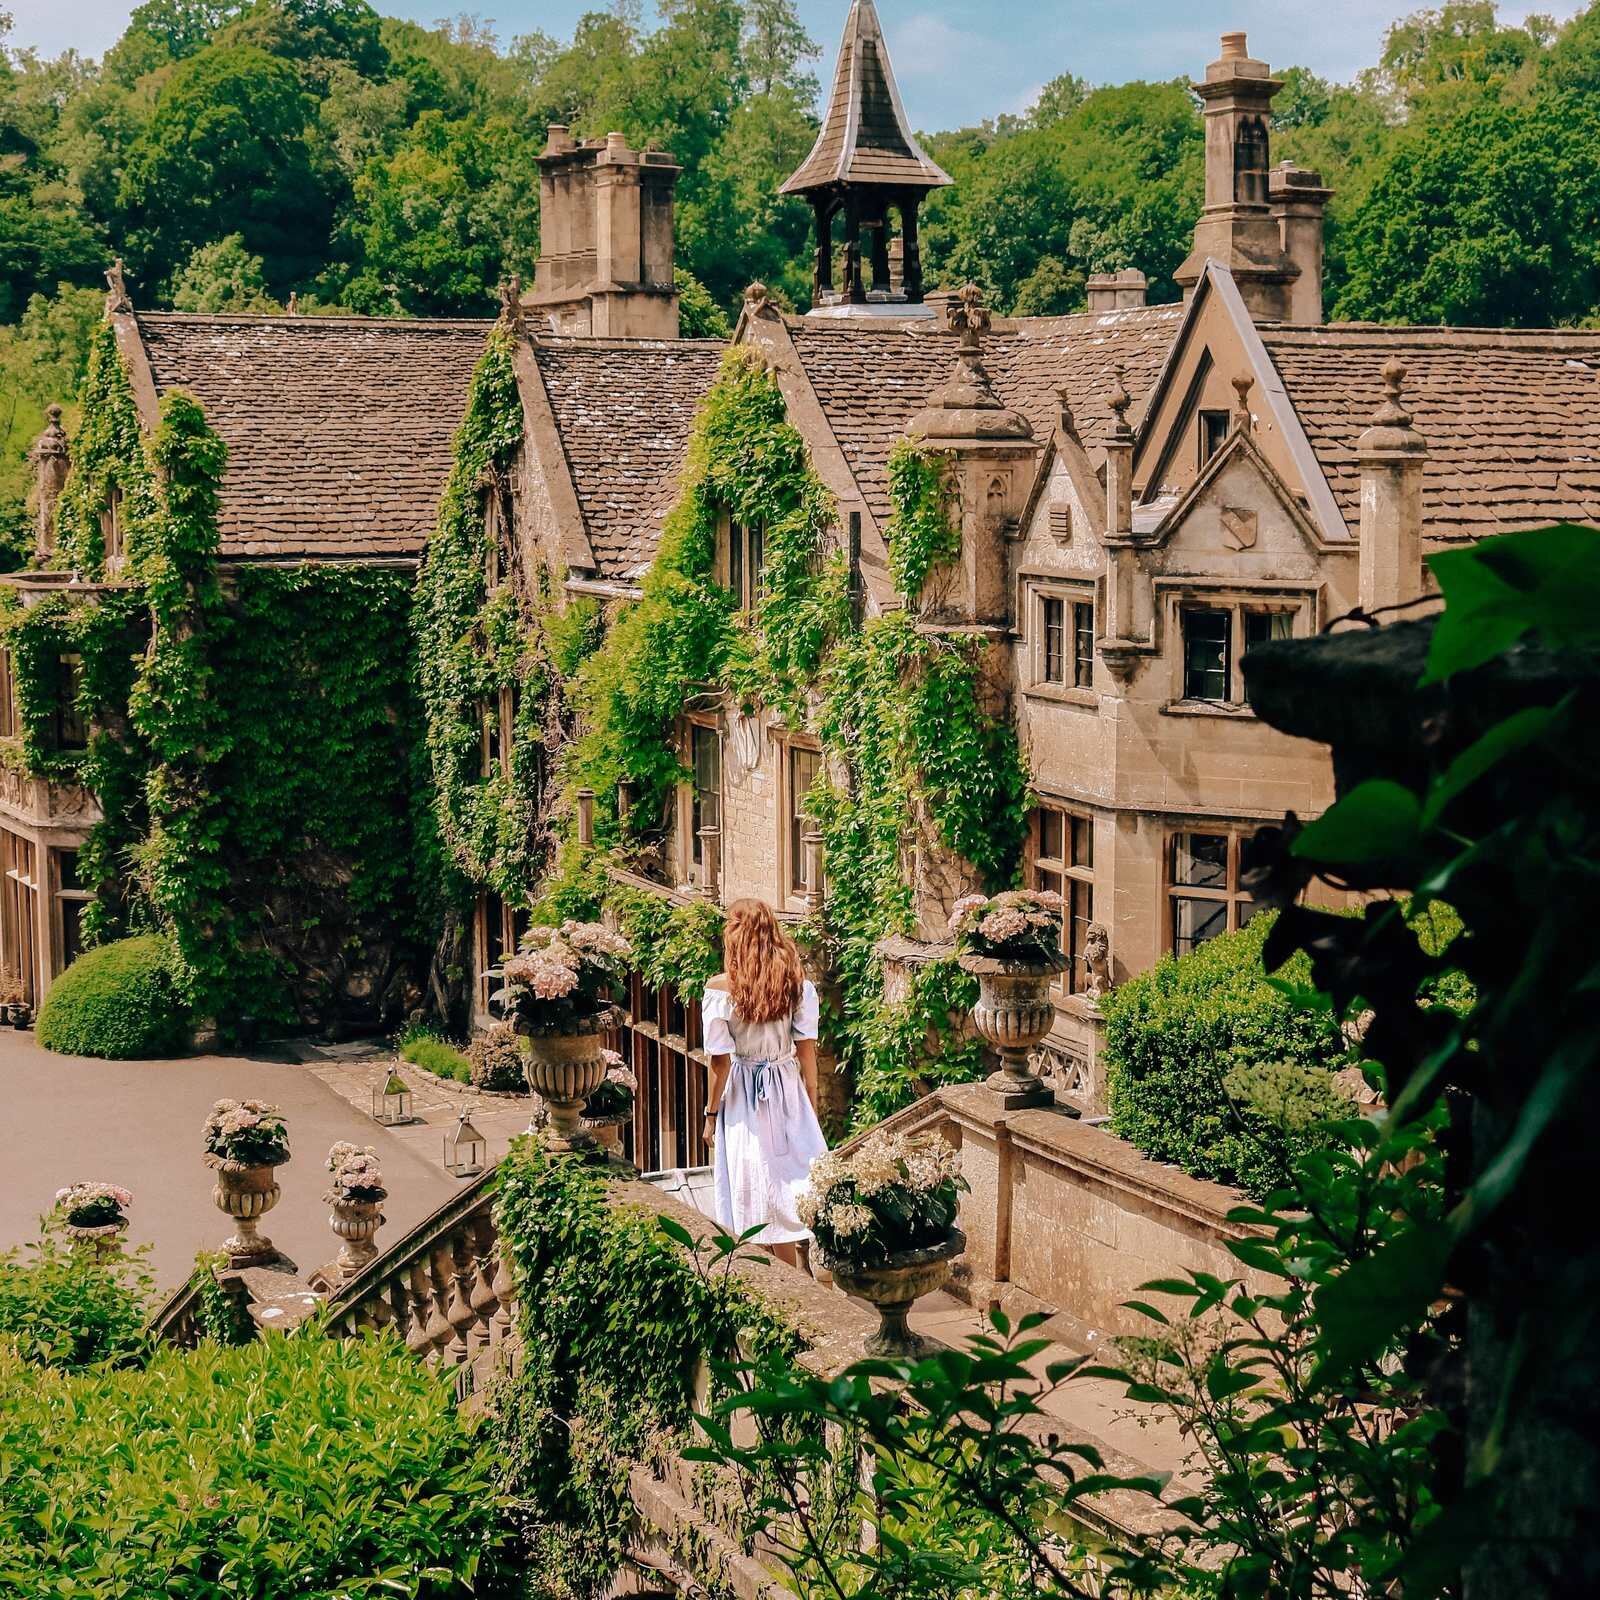 The Manor House in Castle Combe